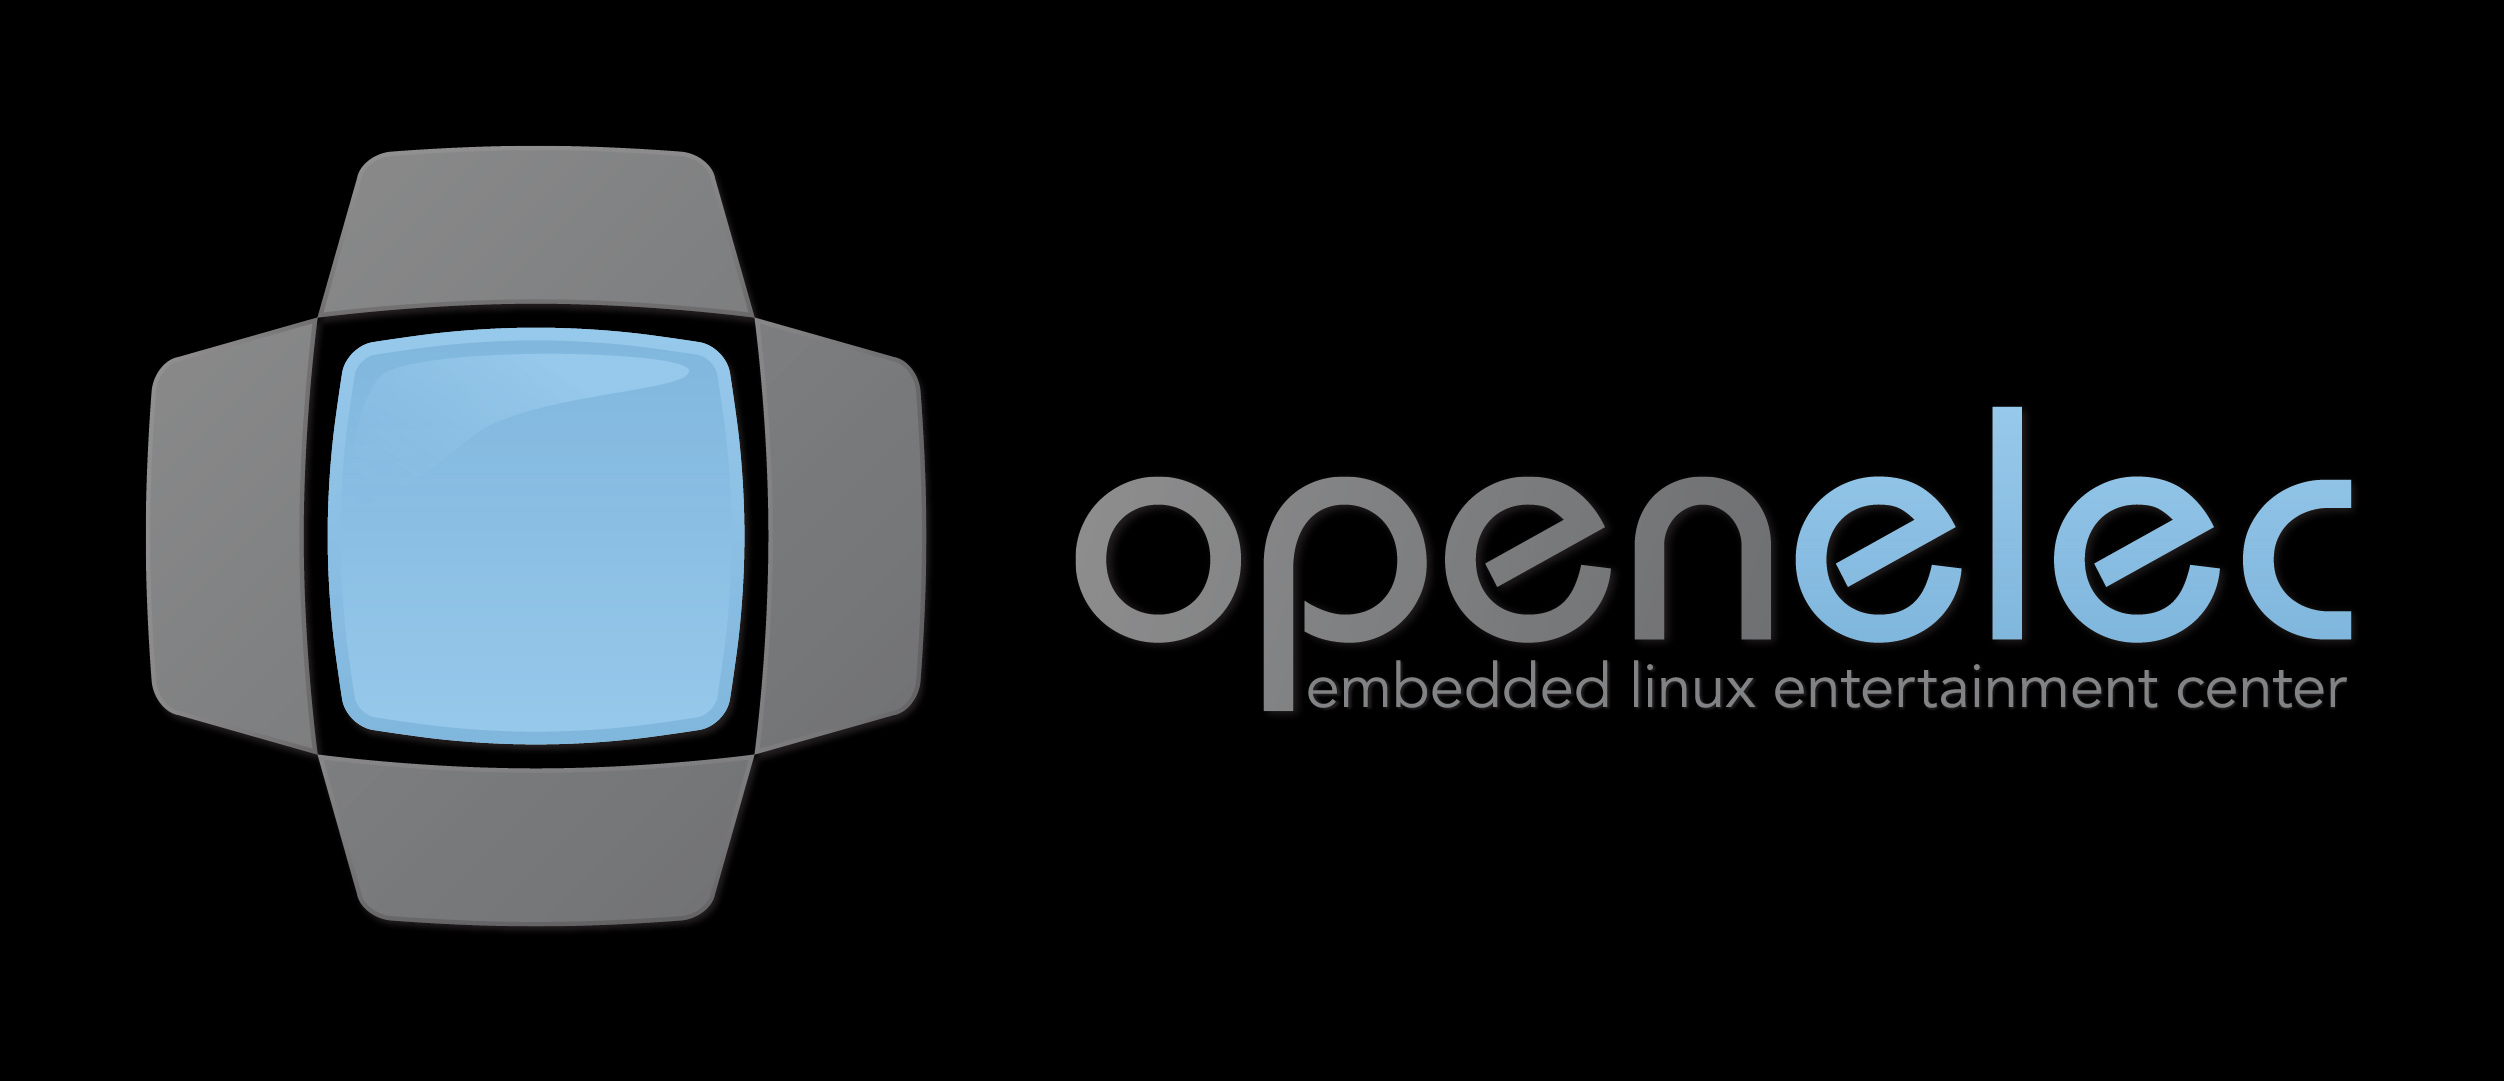 Installing OpenELEC 7.0 on x5 Plus, HDMI Audio Works Under Linux -